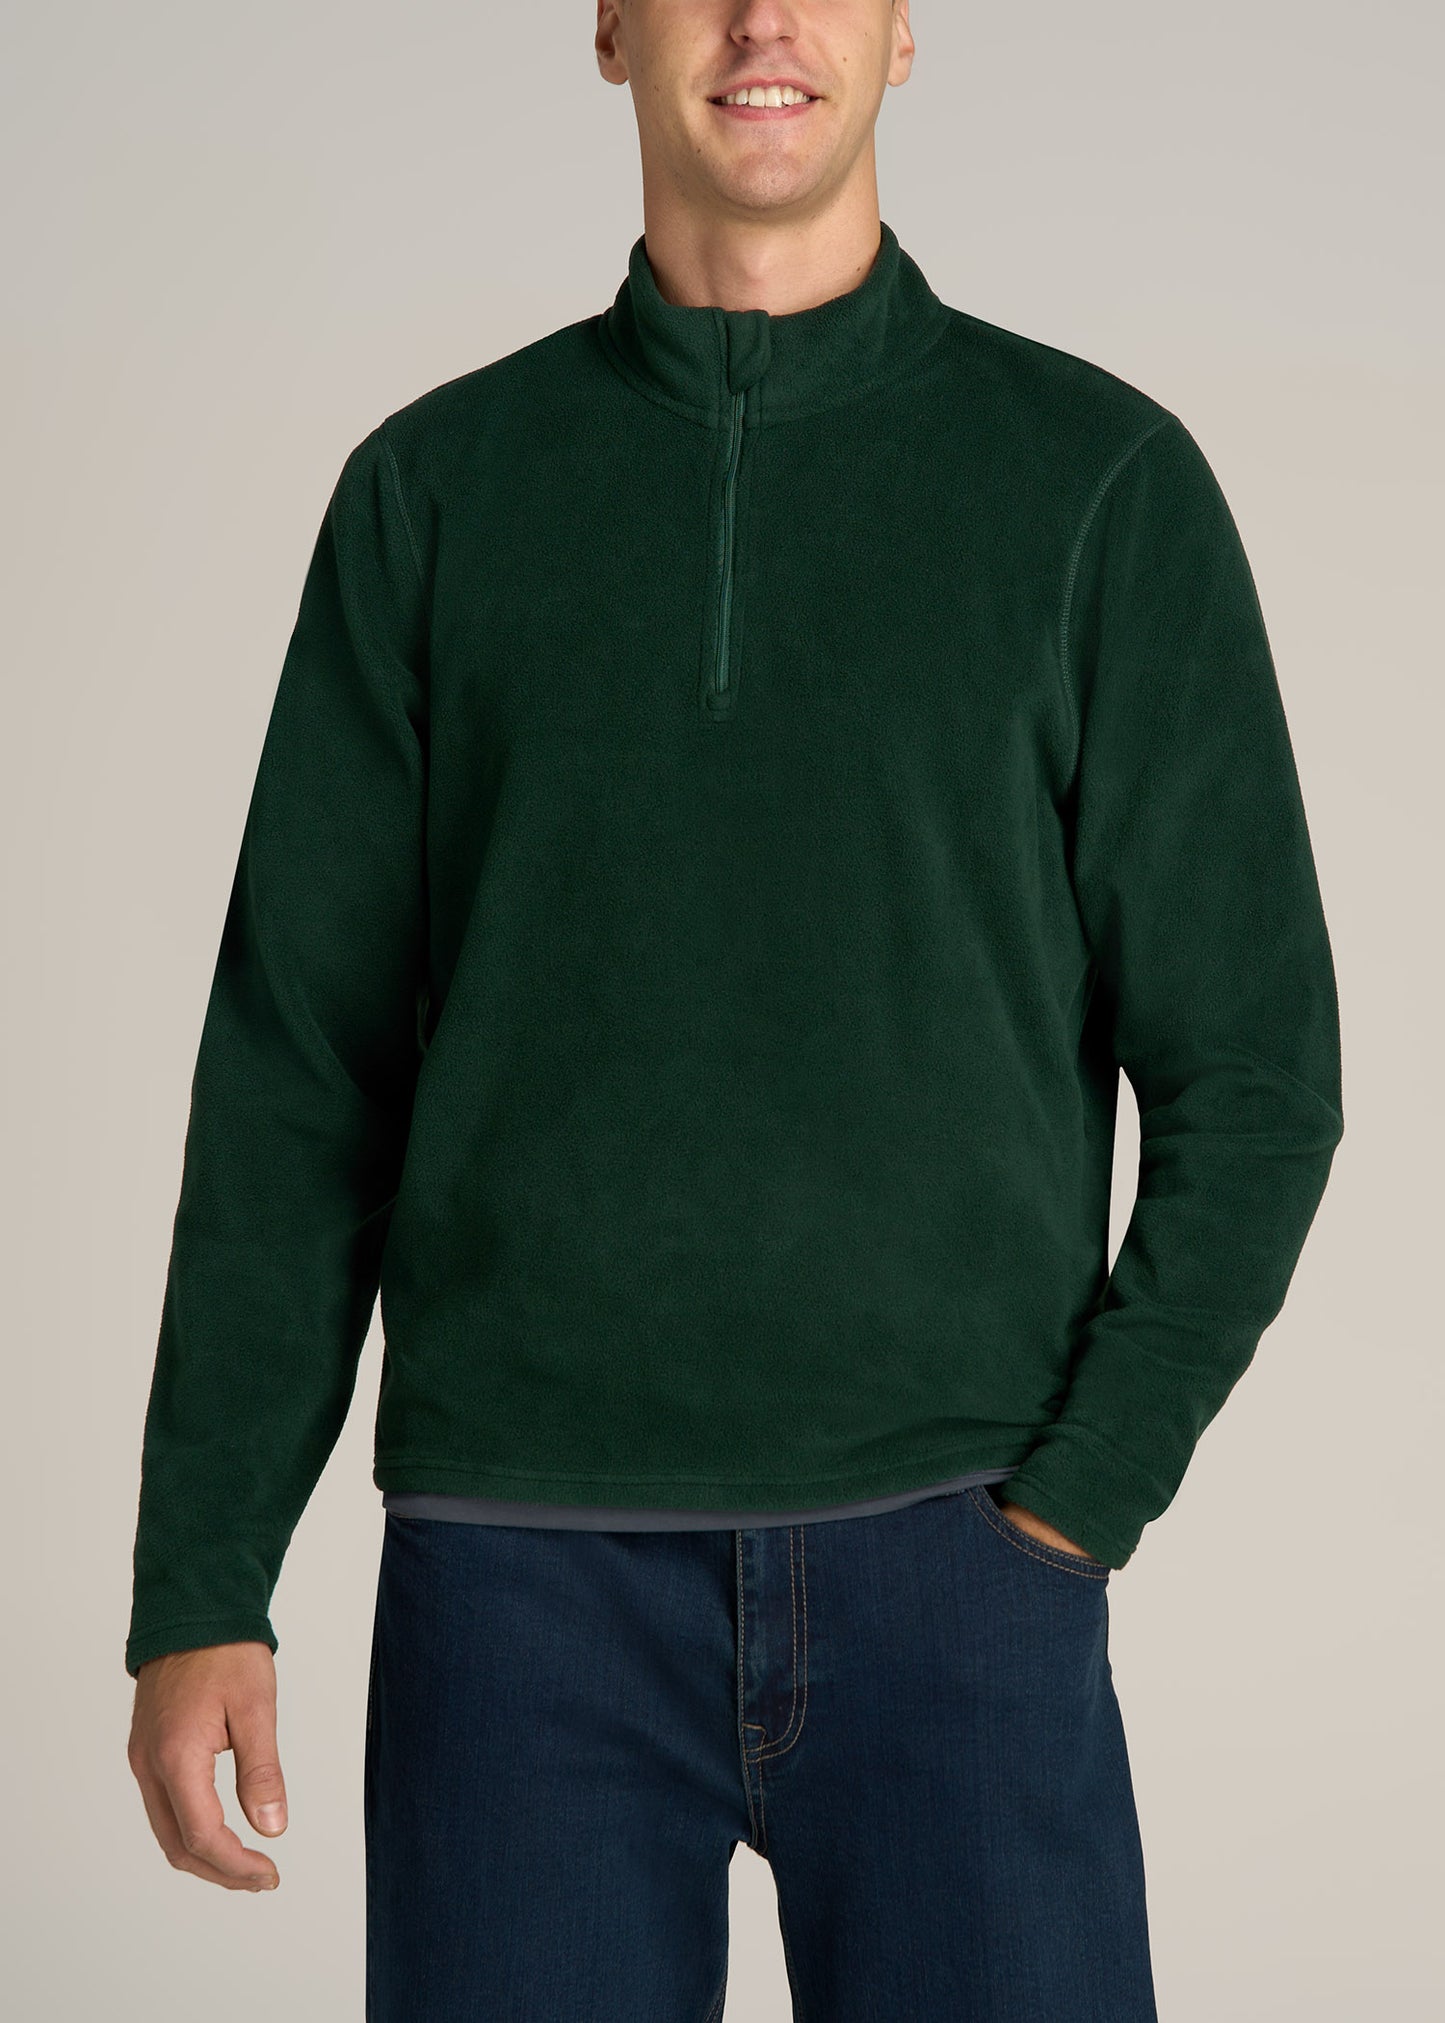 Sherpa Lined Waffle Knit Quarter-Zip Pullover – The American